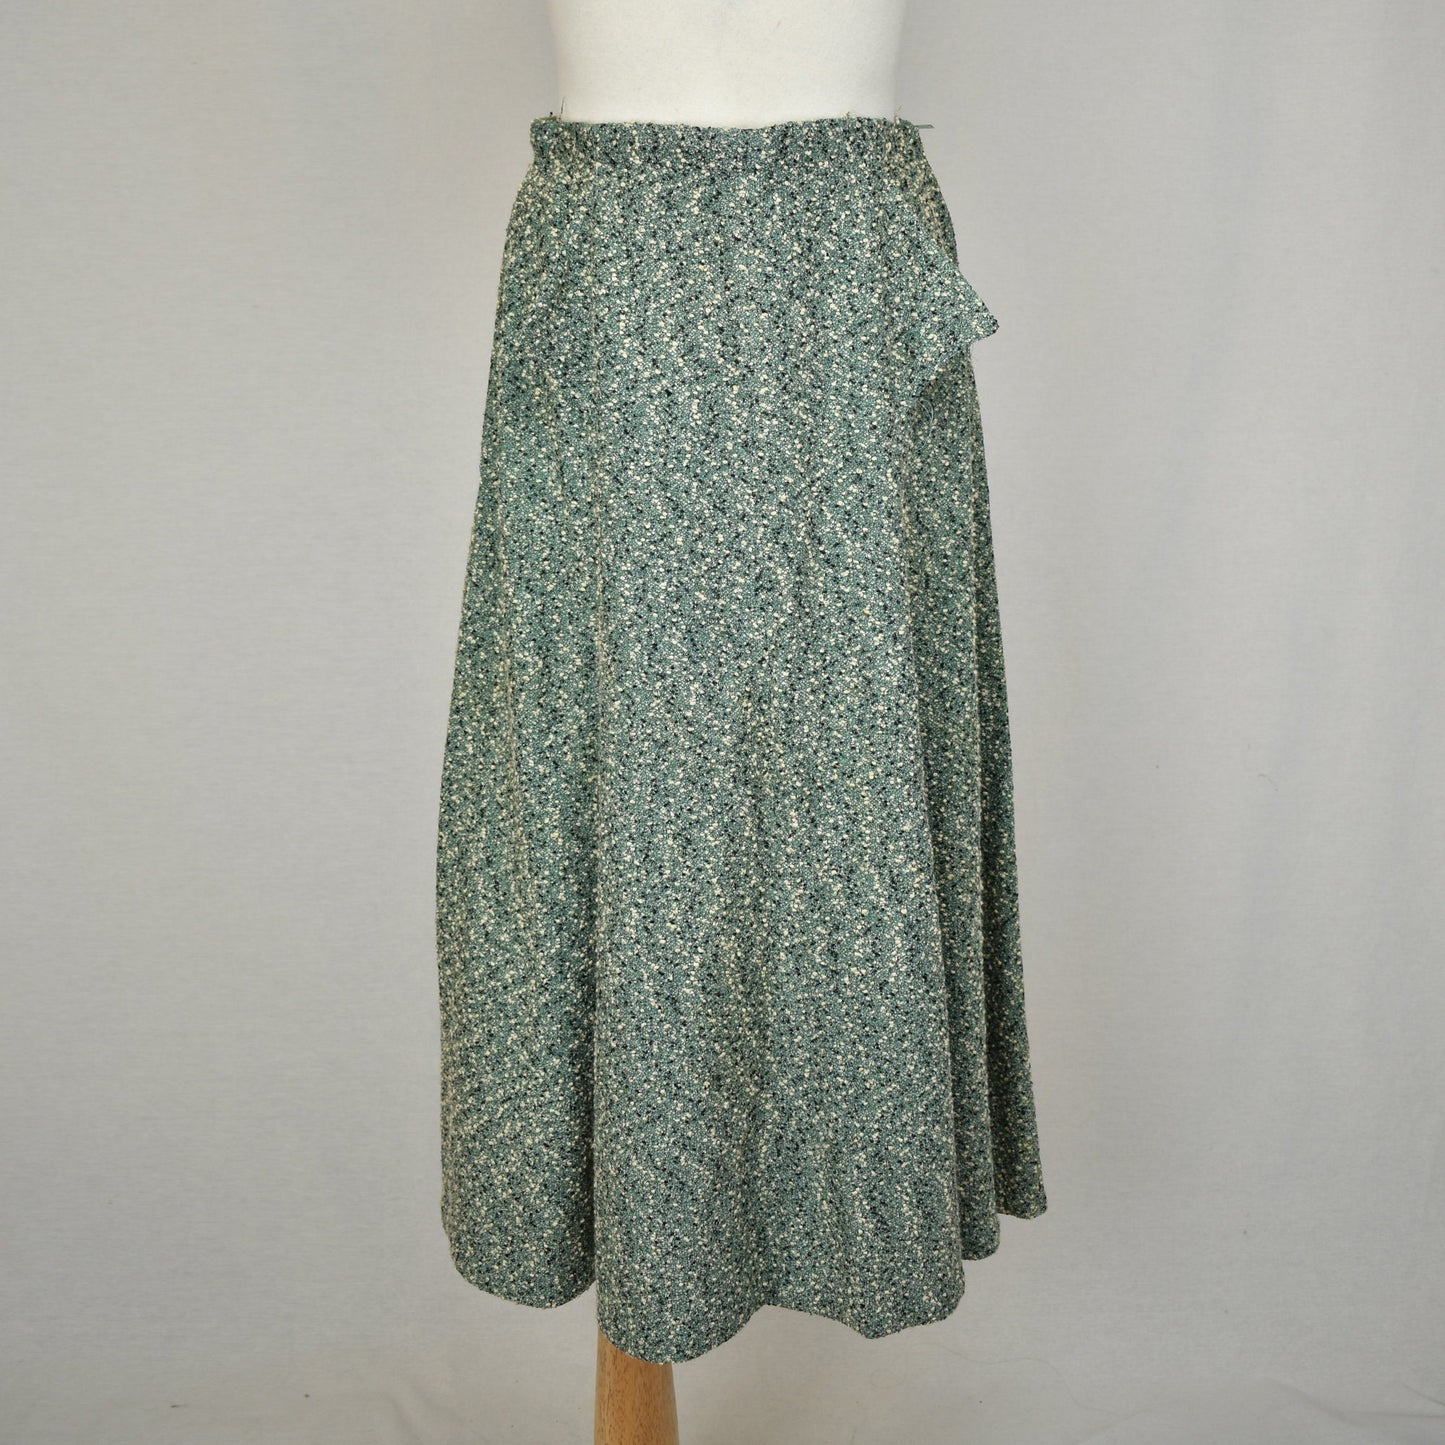 Vintage 40s Boucle Knit Skirt Suit - Cropped Raglan Sleeve Jacket with Contrast Collar & Cuff - 3/4 Length A Line Skirt with Pocket Detail